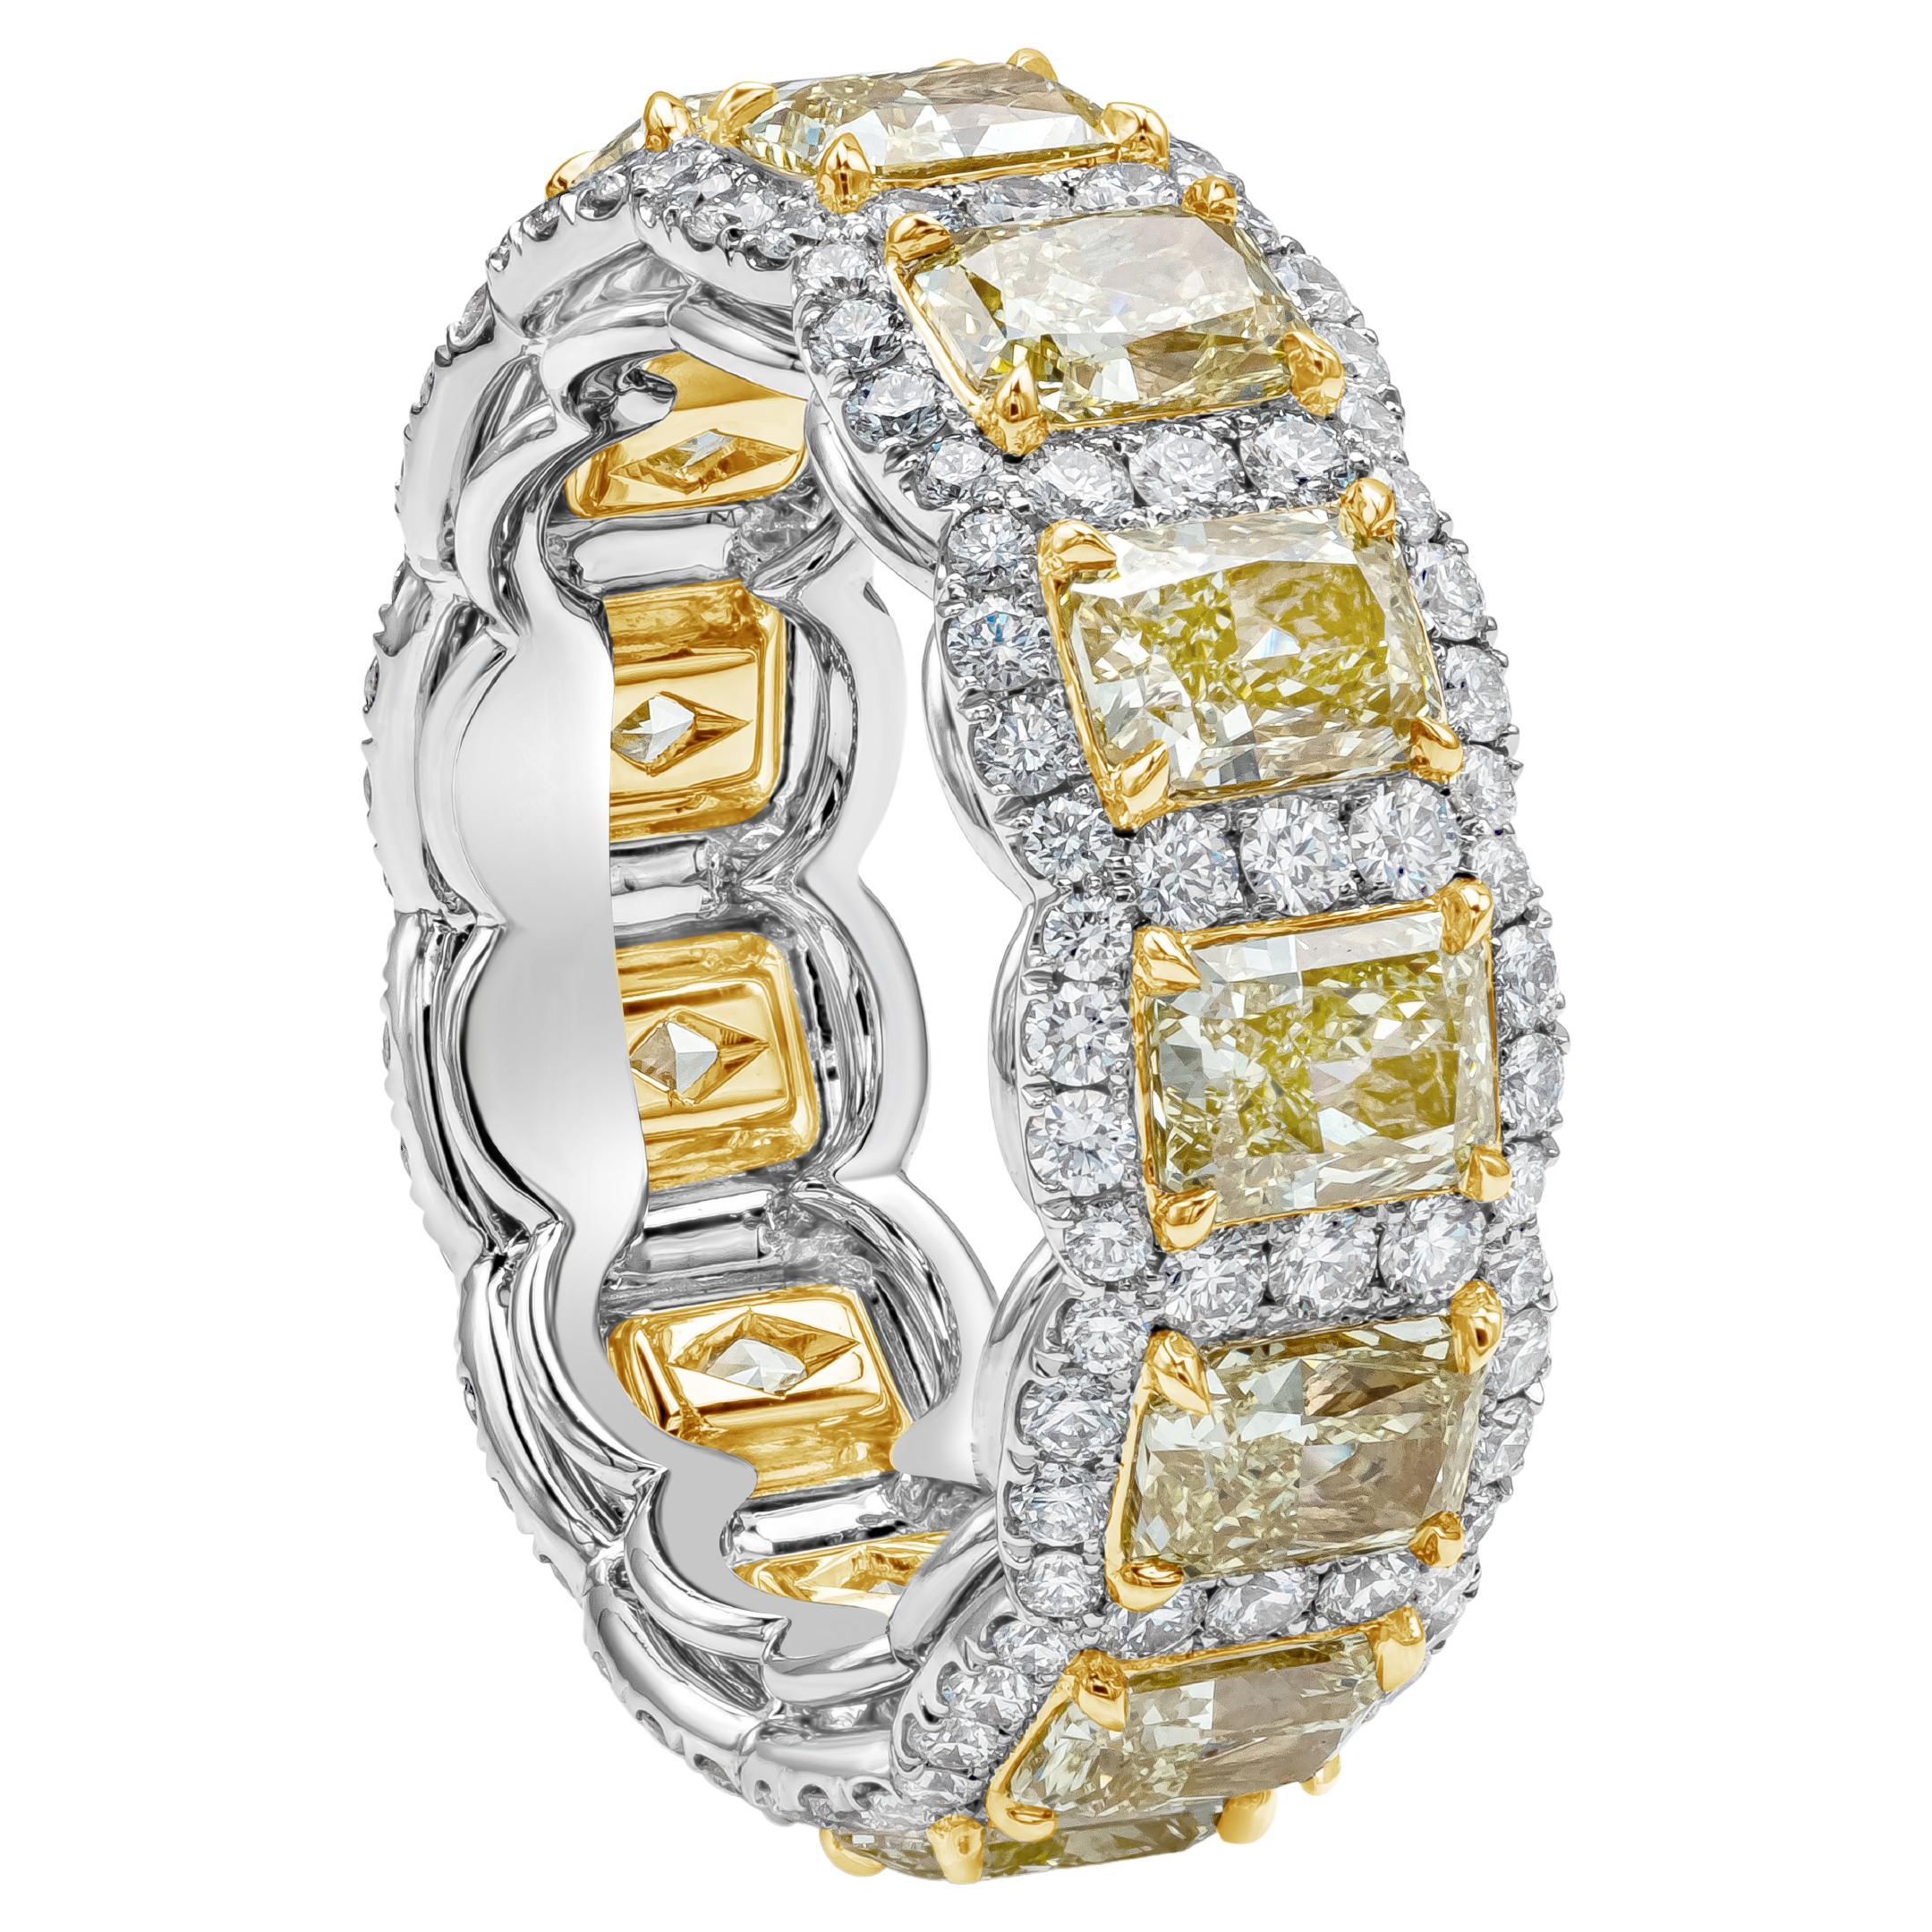 A stylish band showcasing vibrant radiant cut fancy yellow diamonds, each surrounded by a single row of round brilliant diamonds. Yellow diamonds weigh 5.33 carats total, VS in Clarity. Round diamonds weigh 1.30 carats total, F Color and VS in